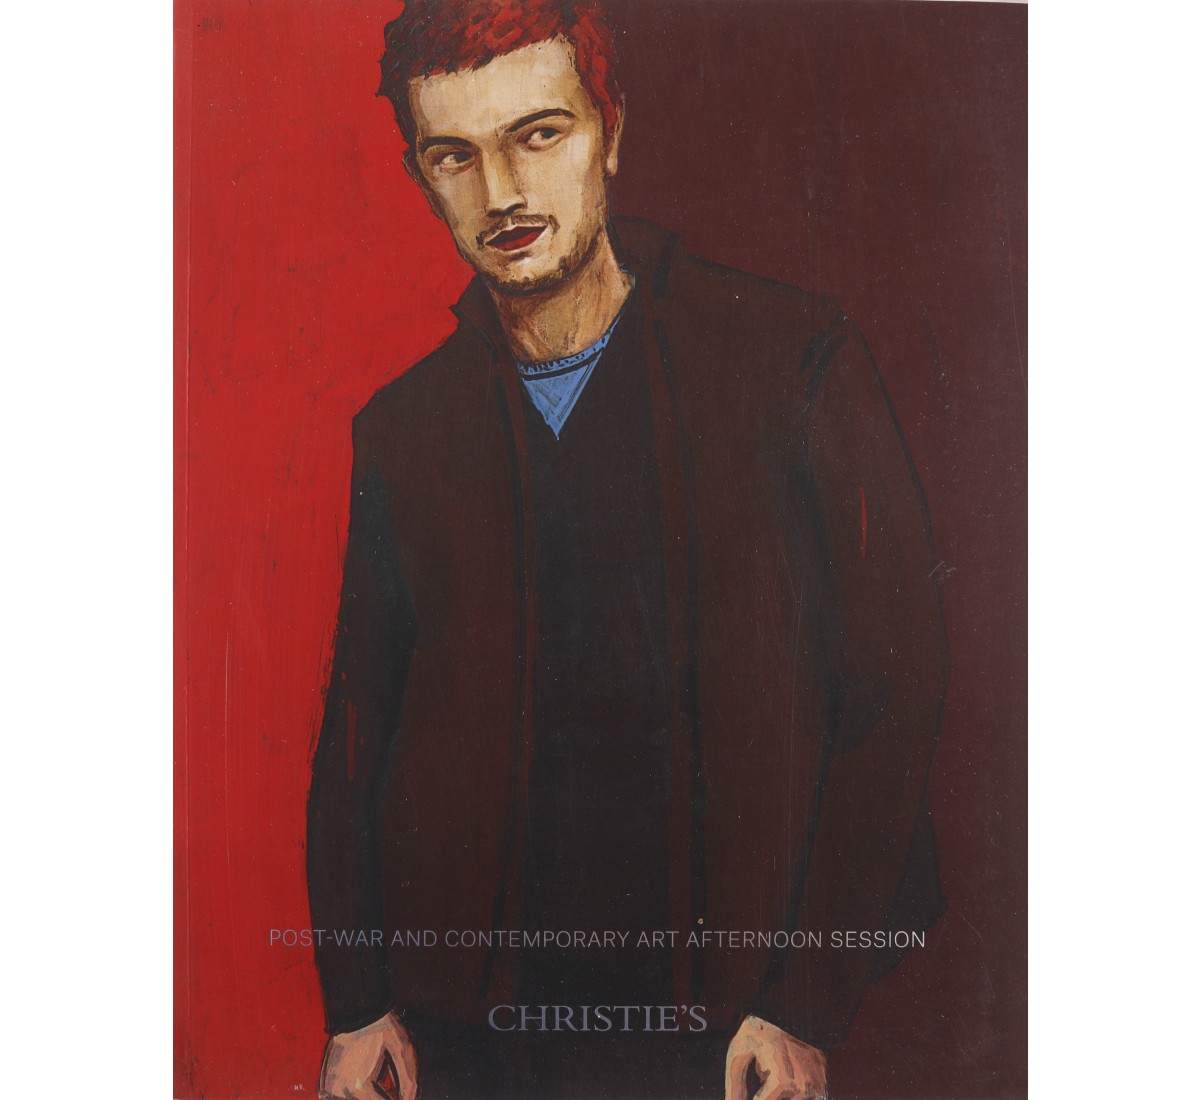 CHRISTIE'S, POST-WAR AND CONTEMPORARY ART